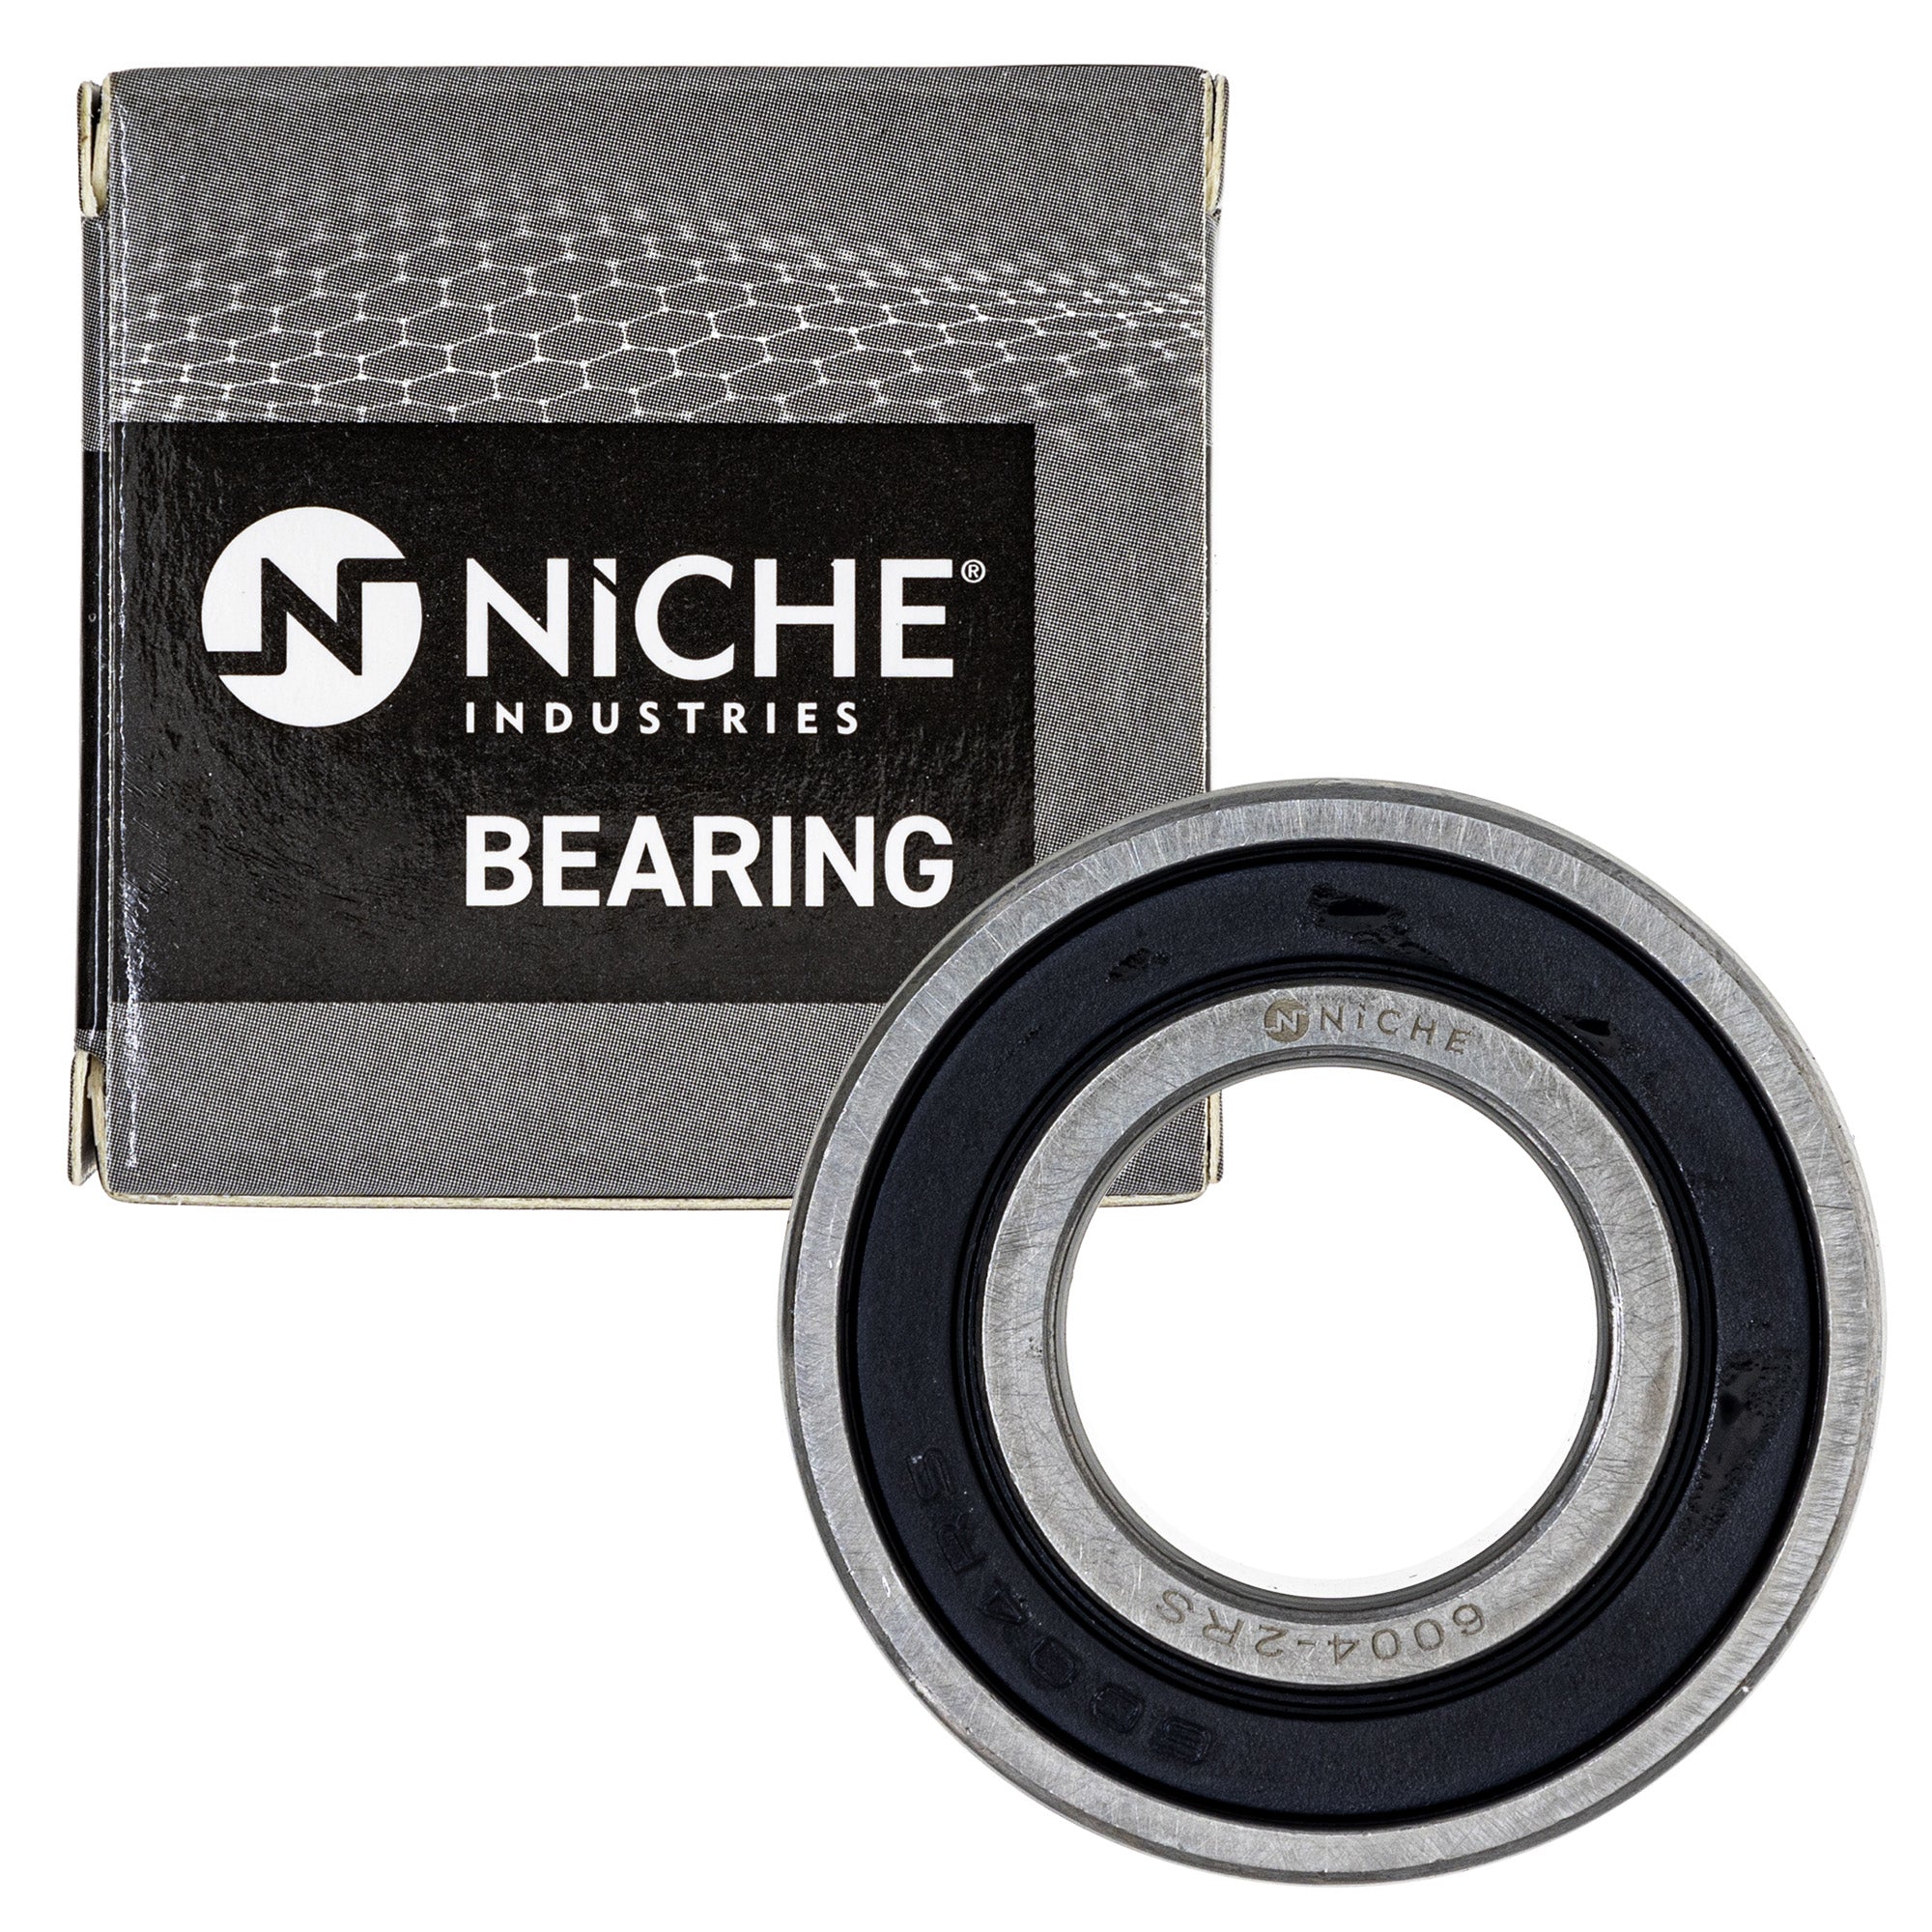 NICHE MK1009134 Wheel Bearing Seal Kit for zOTHER Ref No YZ250